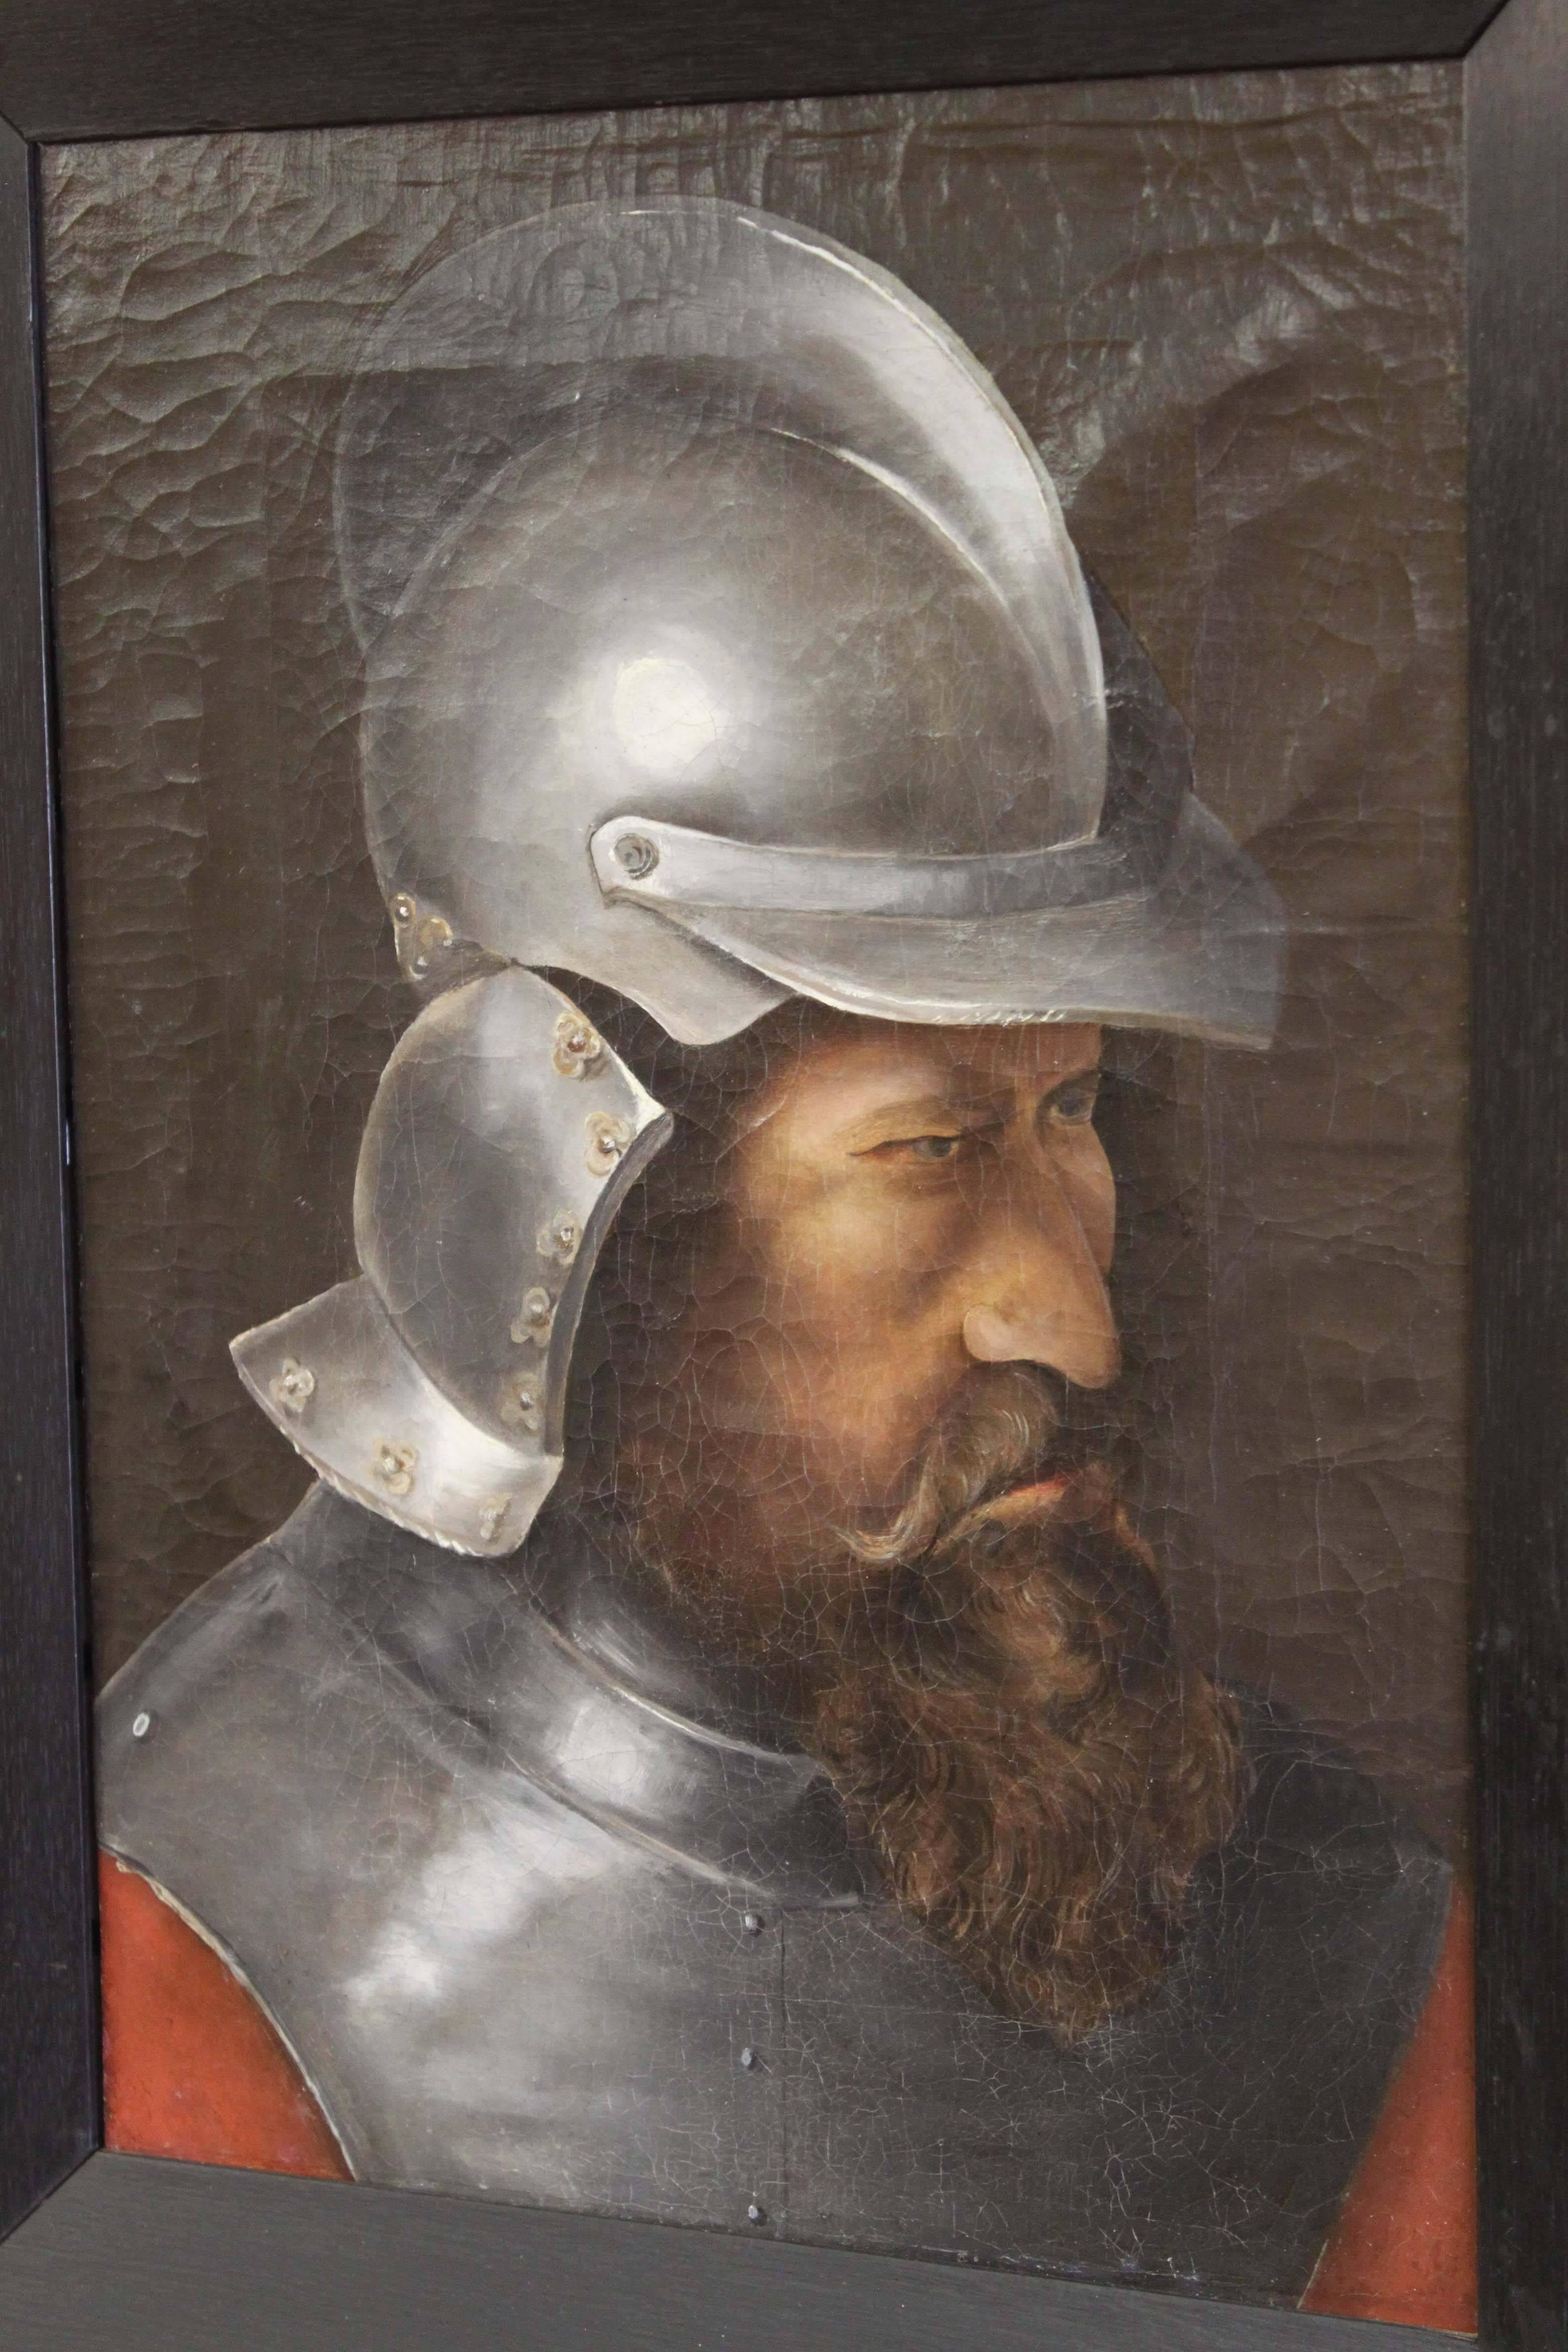 A striking portrait of a man in a steel helmet with armour. This piece has been, at some earlier time, cut out from a larger painting. We suspect it was painted in the United Kingdom around the late 19th century, but difficult to be sure. Original